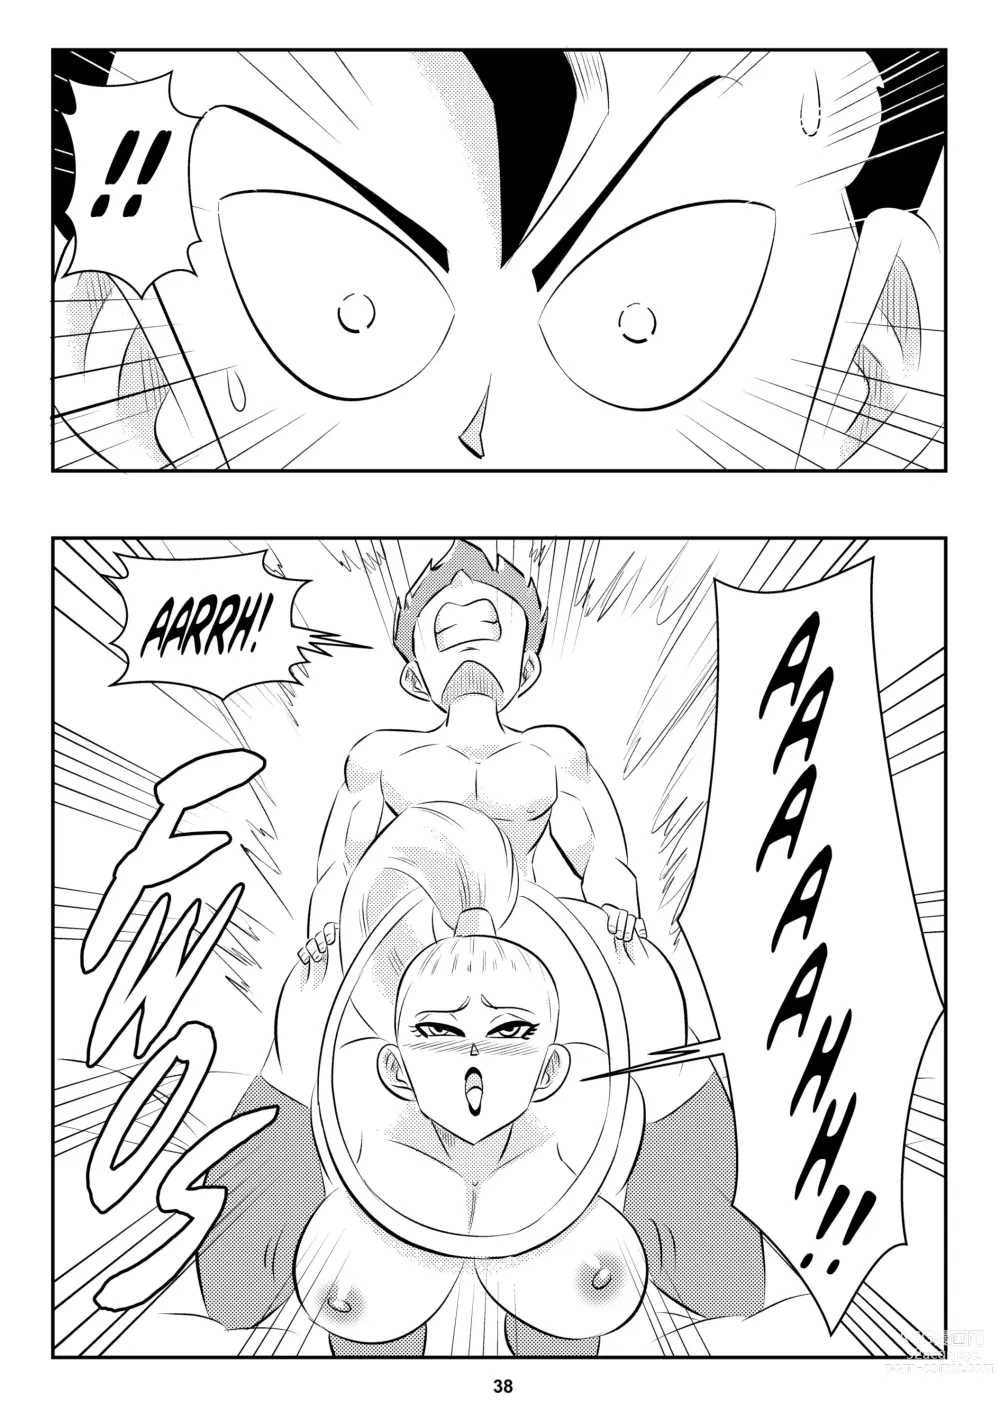 Page 39 of doujinshi Heavenly Training